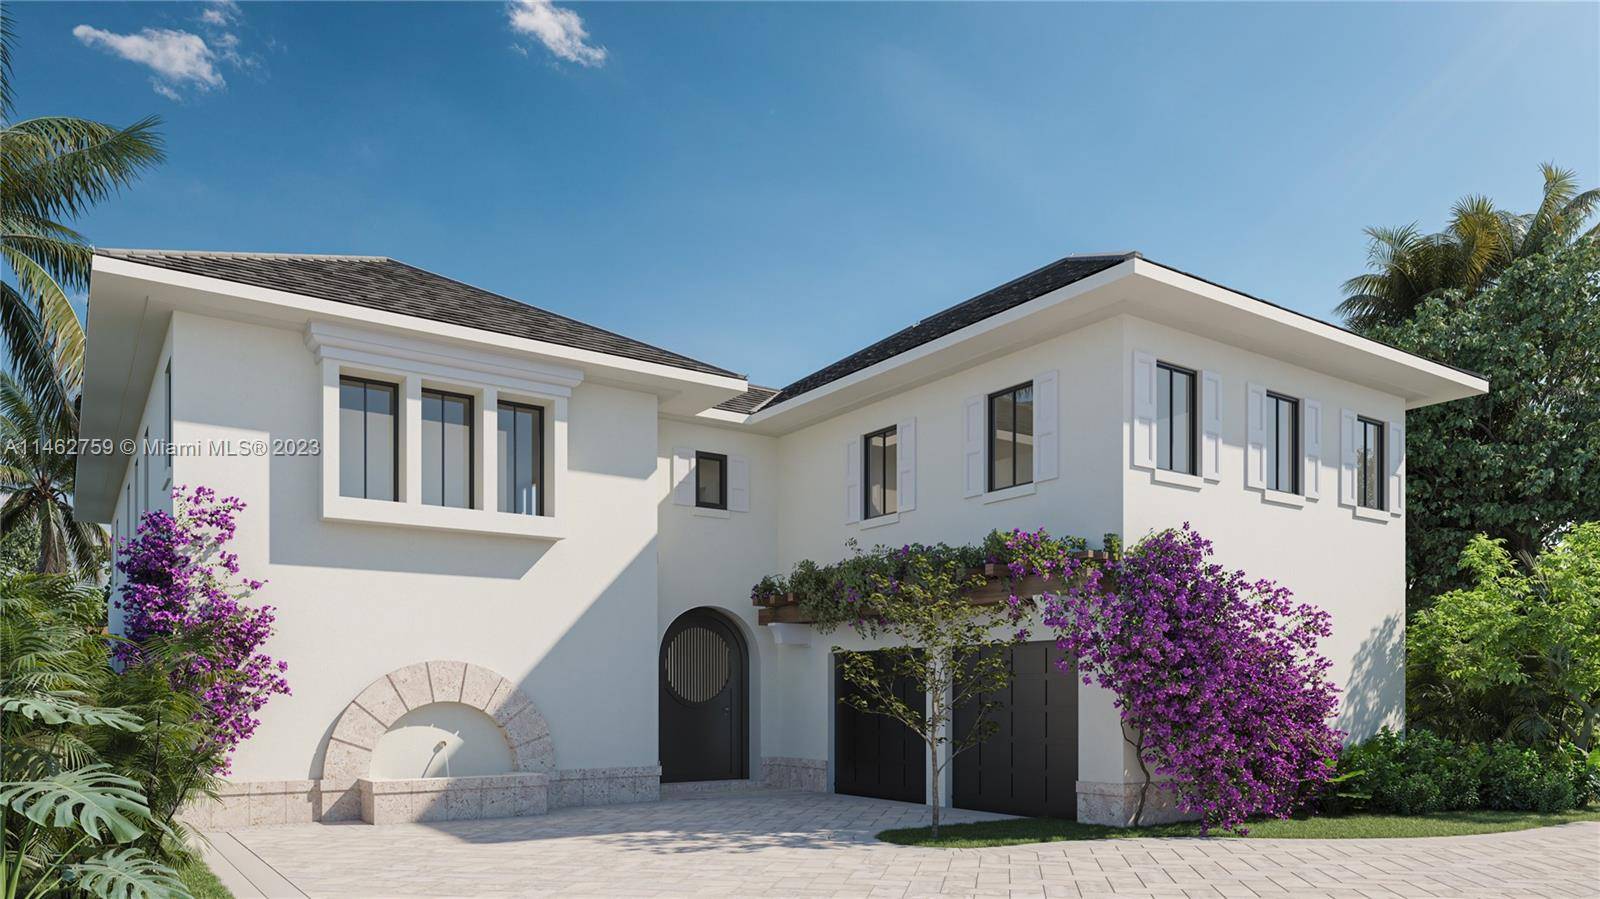 New construction, luxury home designed by renowned architect Jorge L.